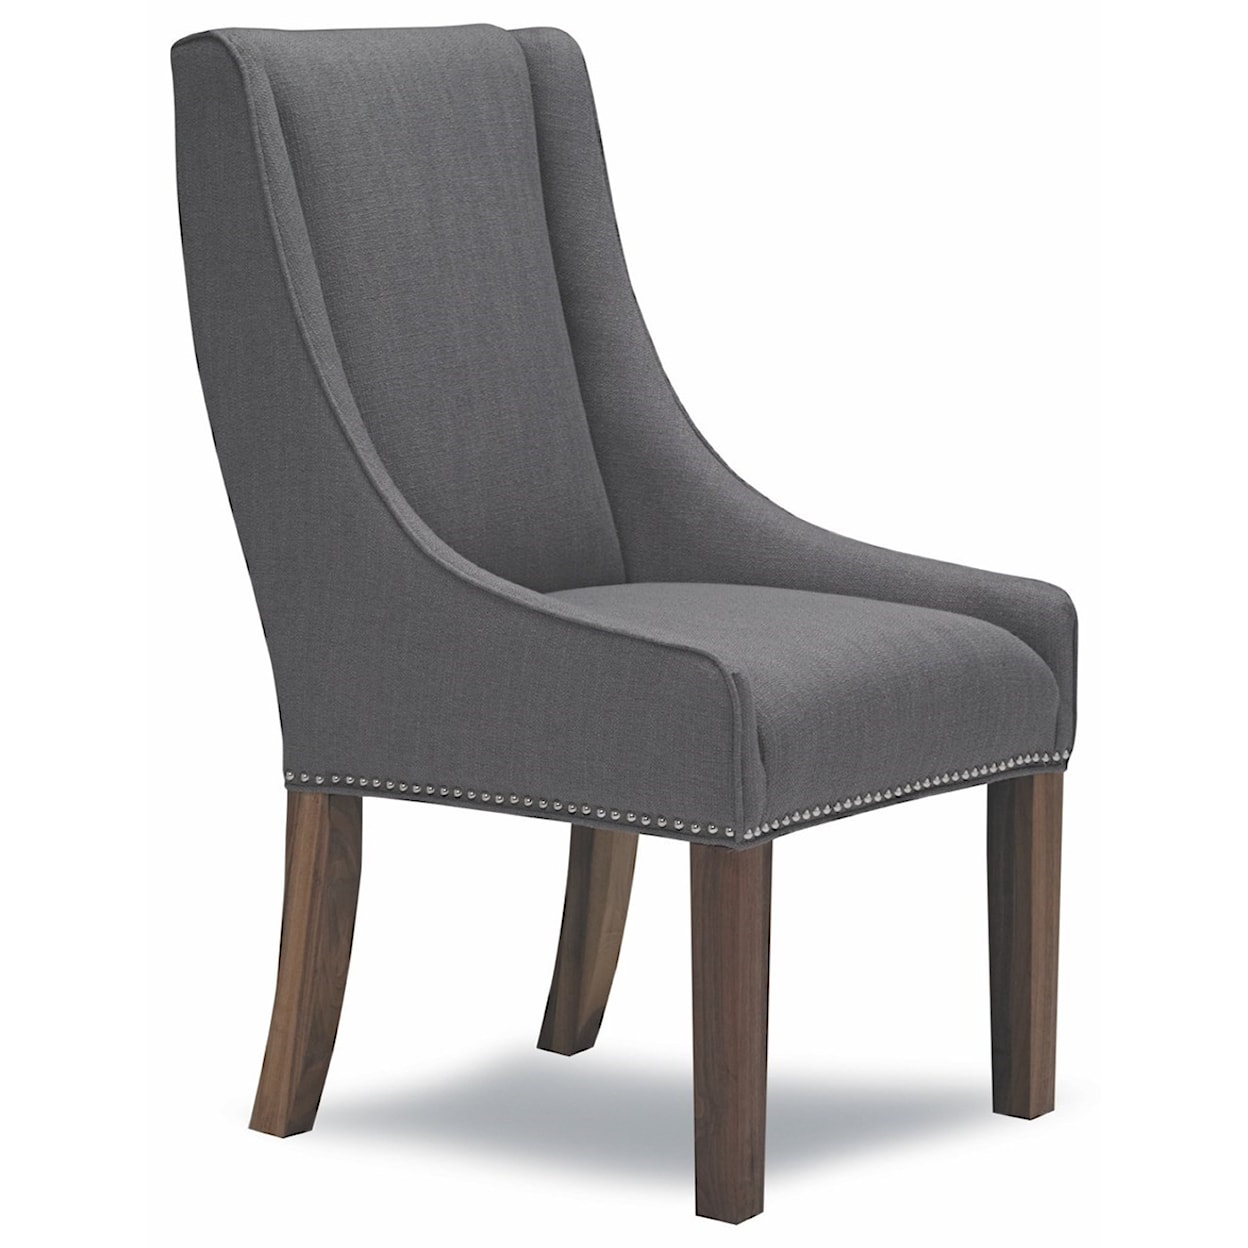 Lewis Home 7373 Upholstered Dining Chair